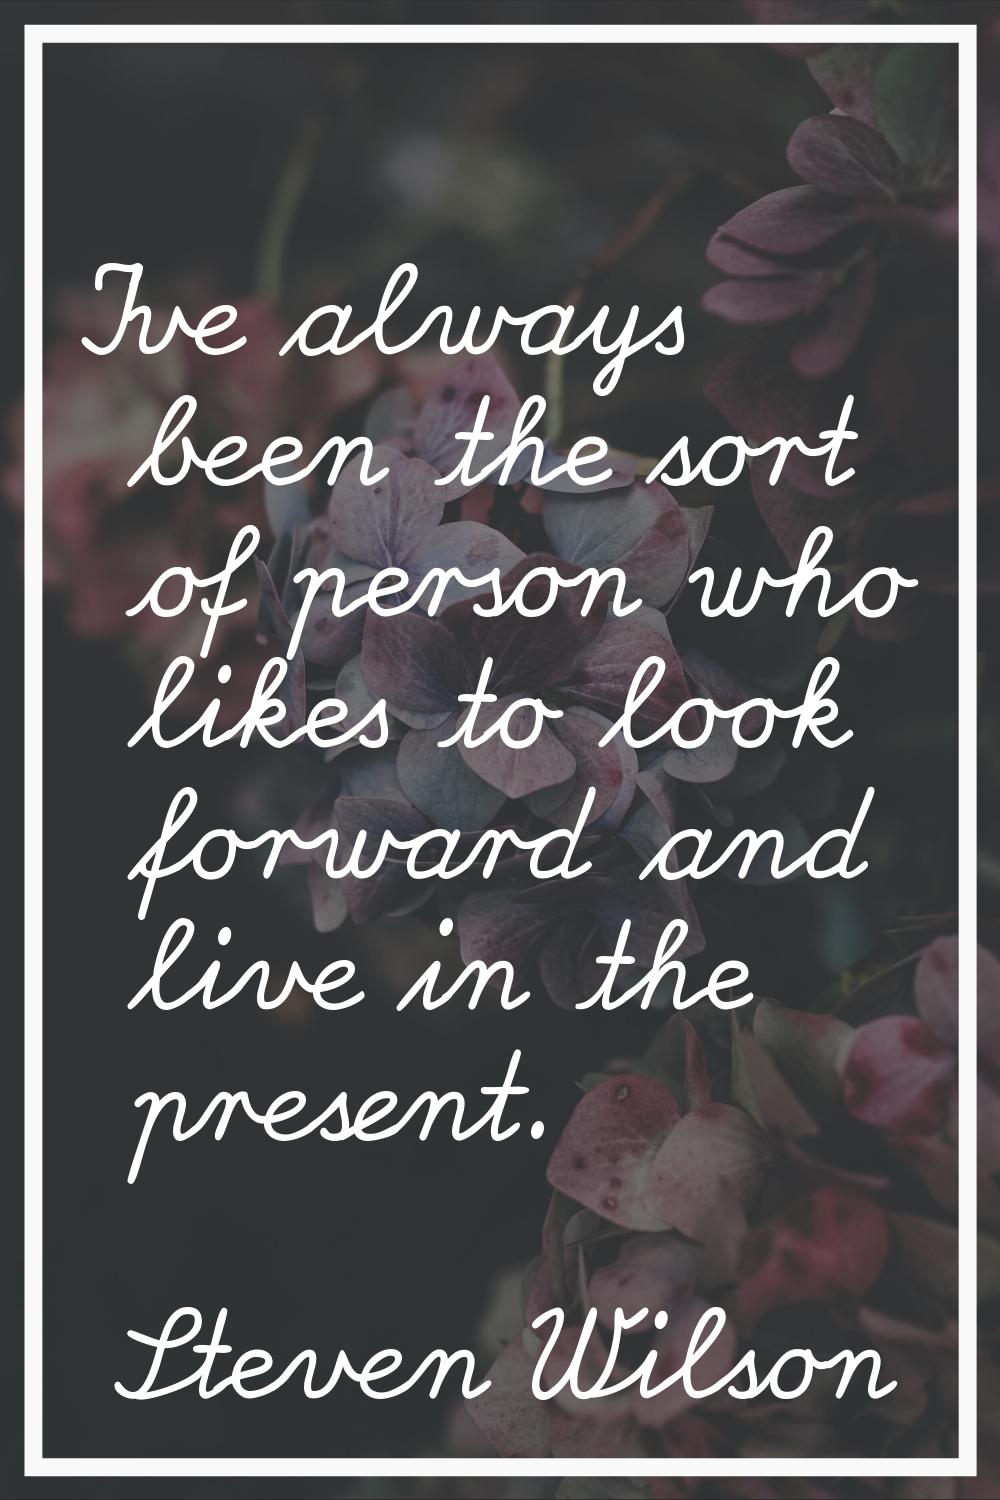 I've always been the sort of person who likes to look forward and live in the present.